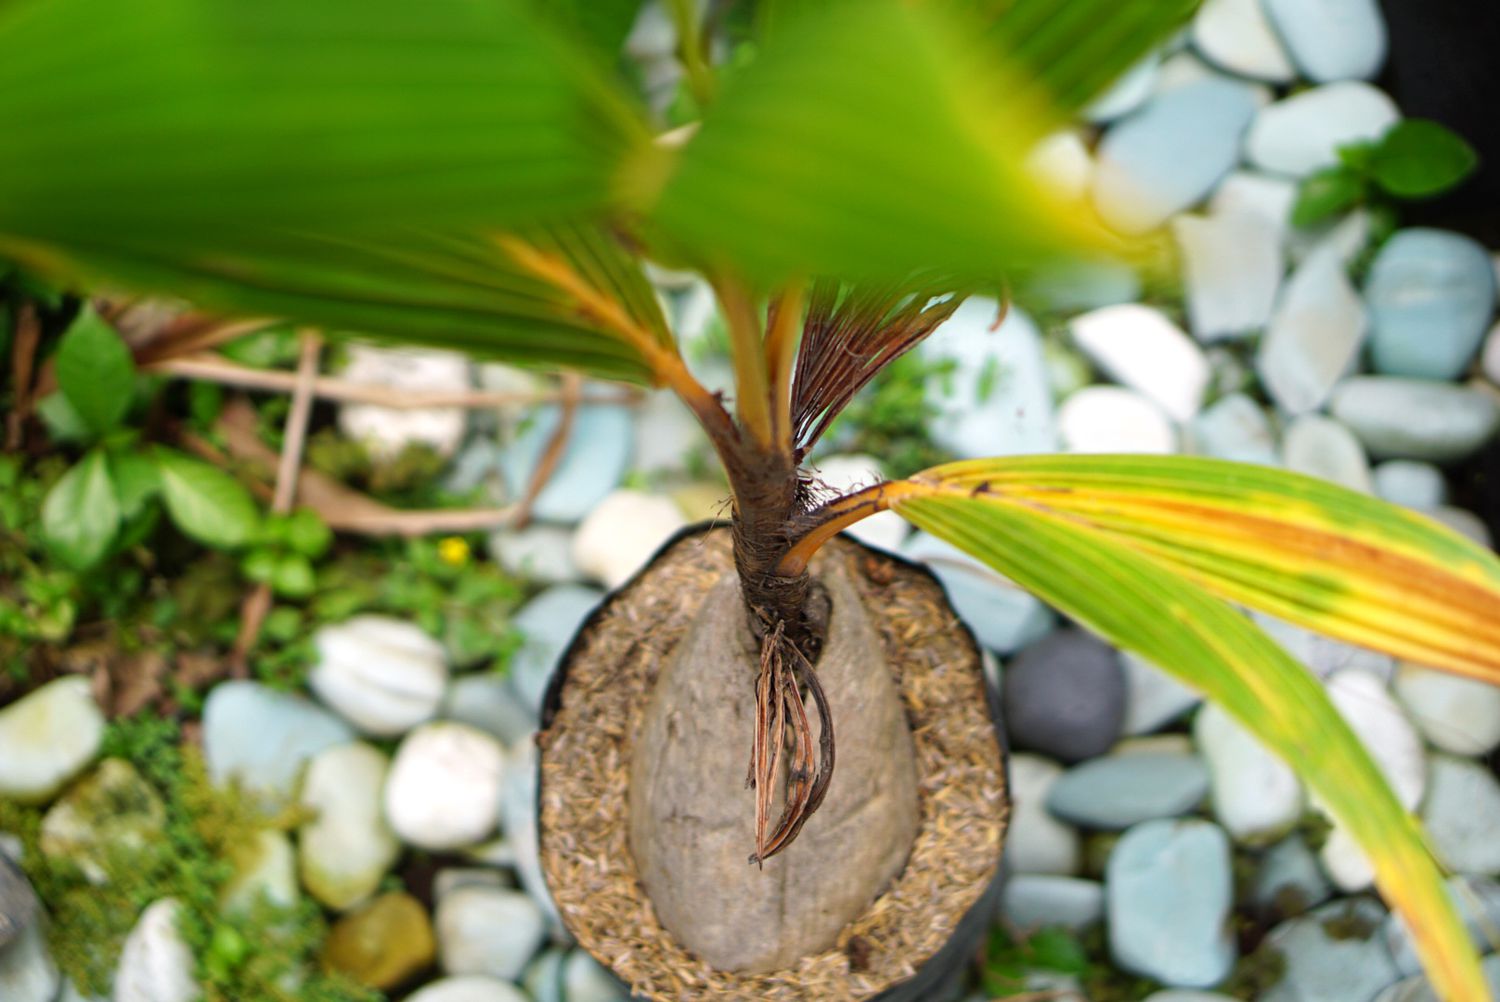 How To Plant Palm Tree Seeds